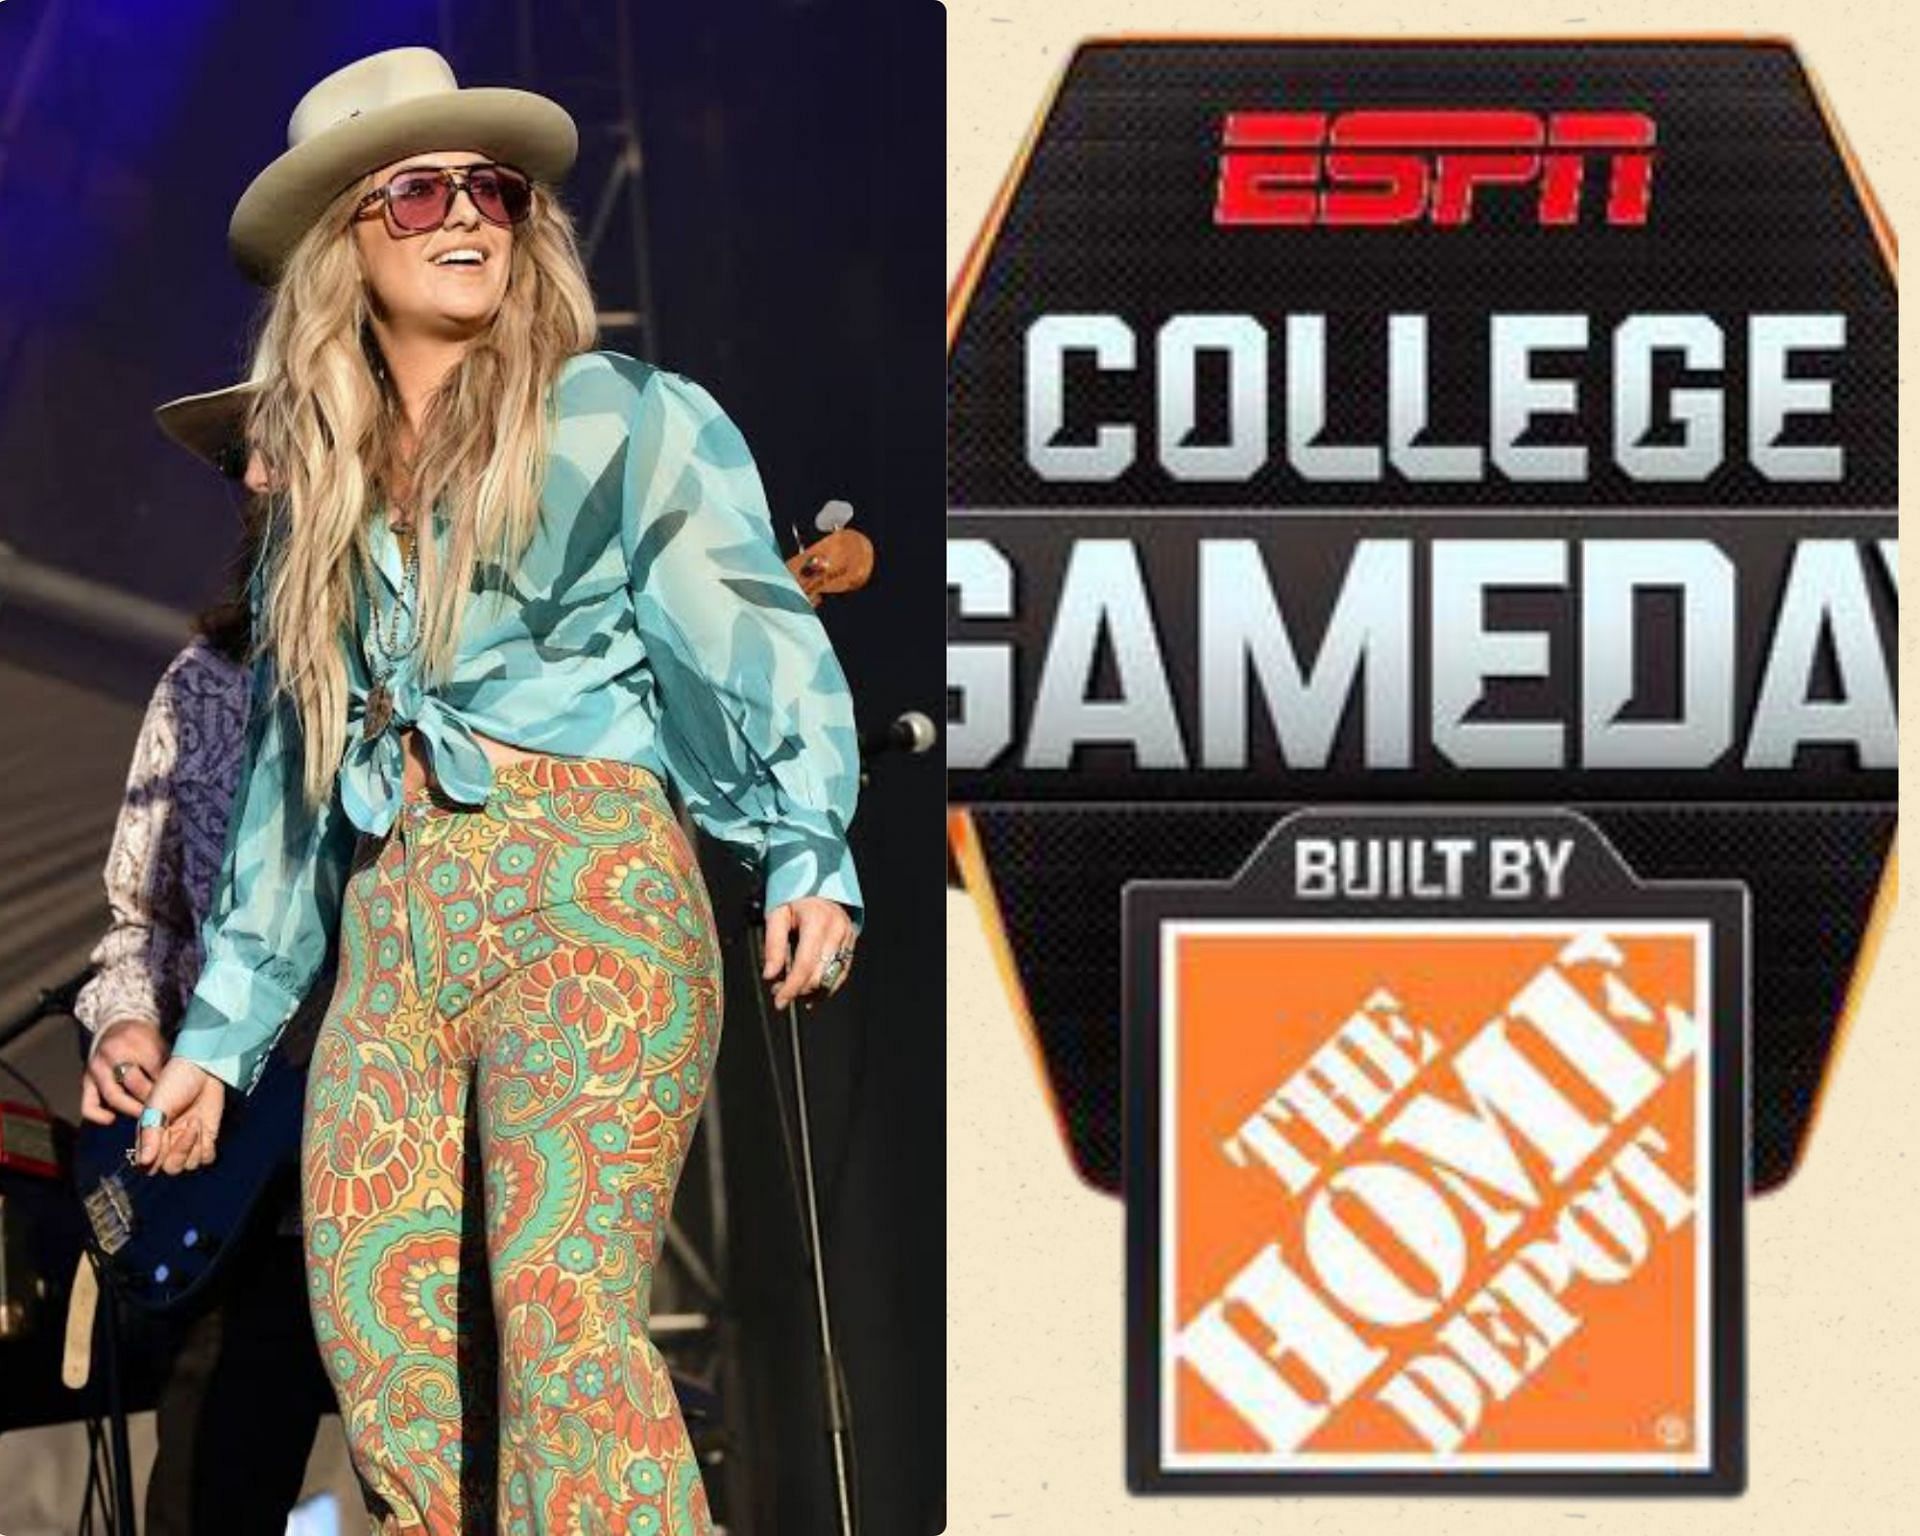 Who sings the College Gameday song? Know all about Lainey Wilson